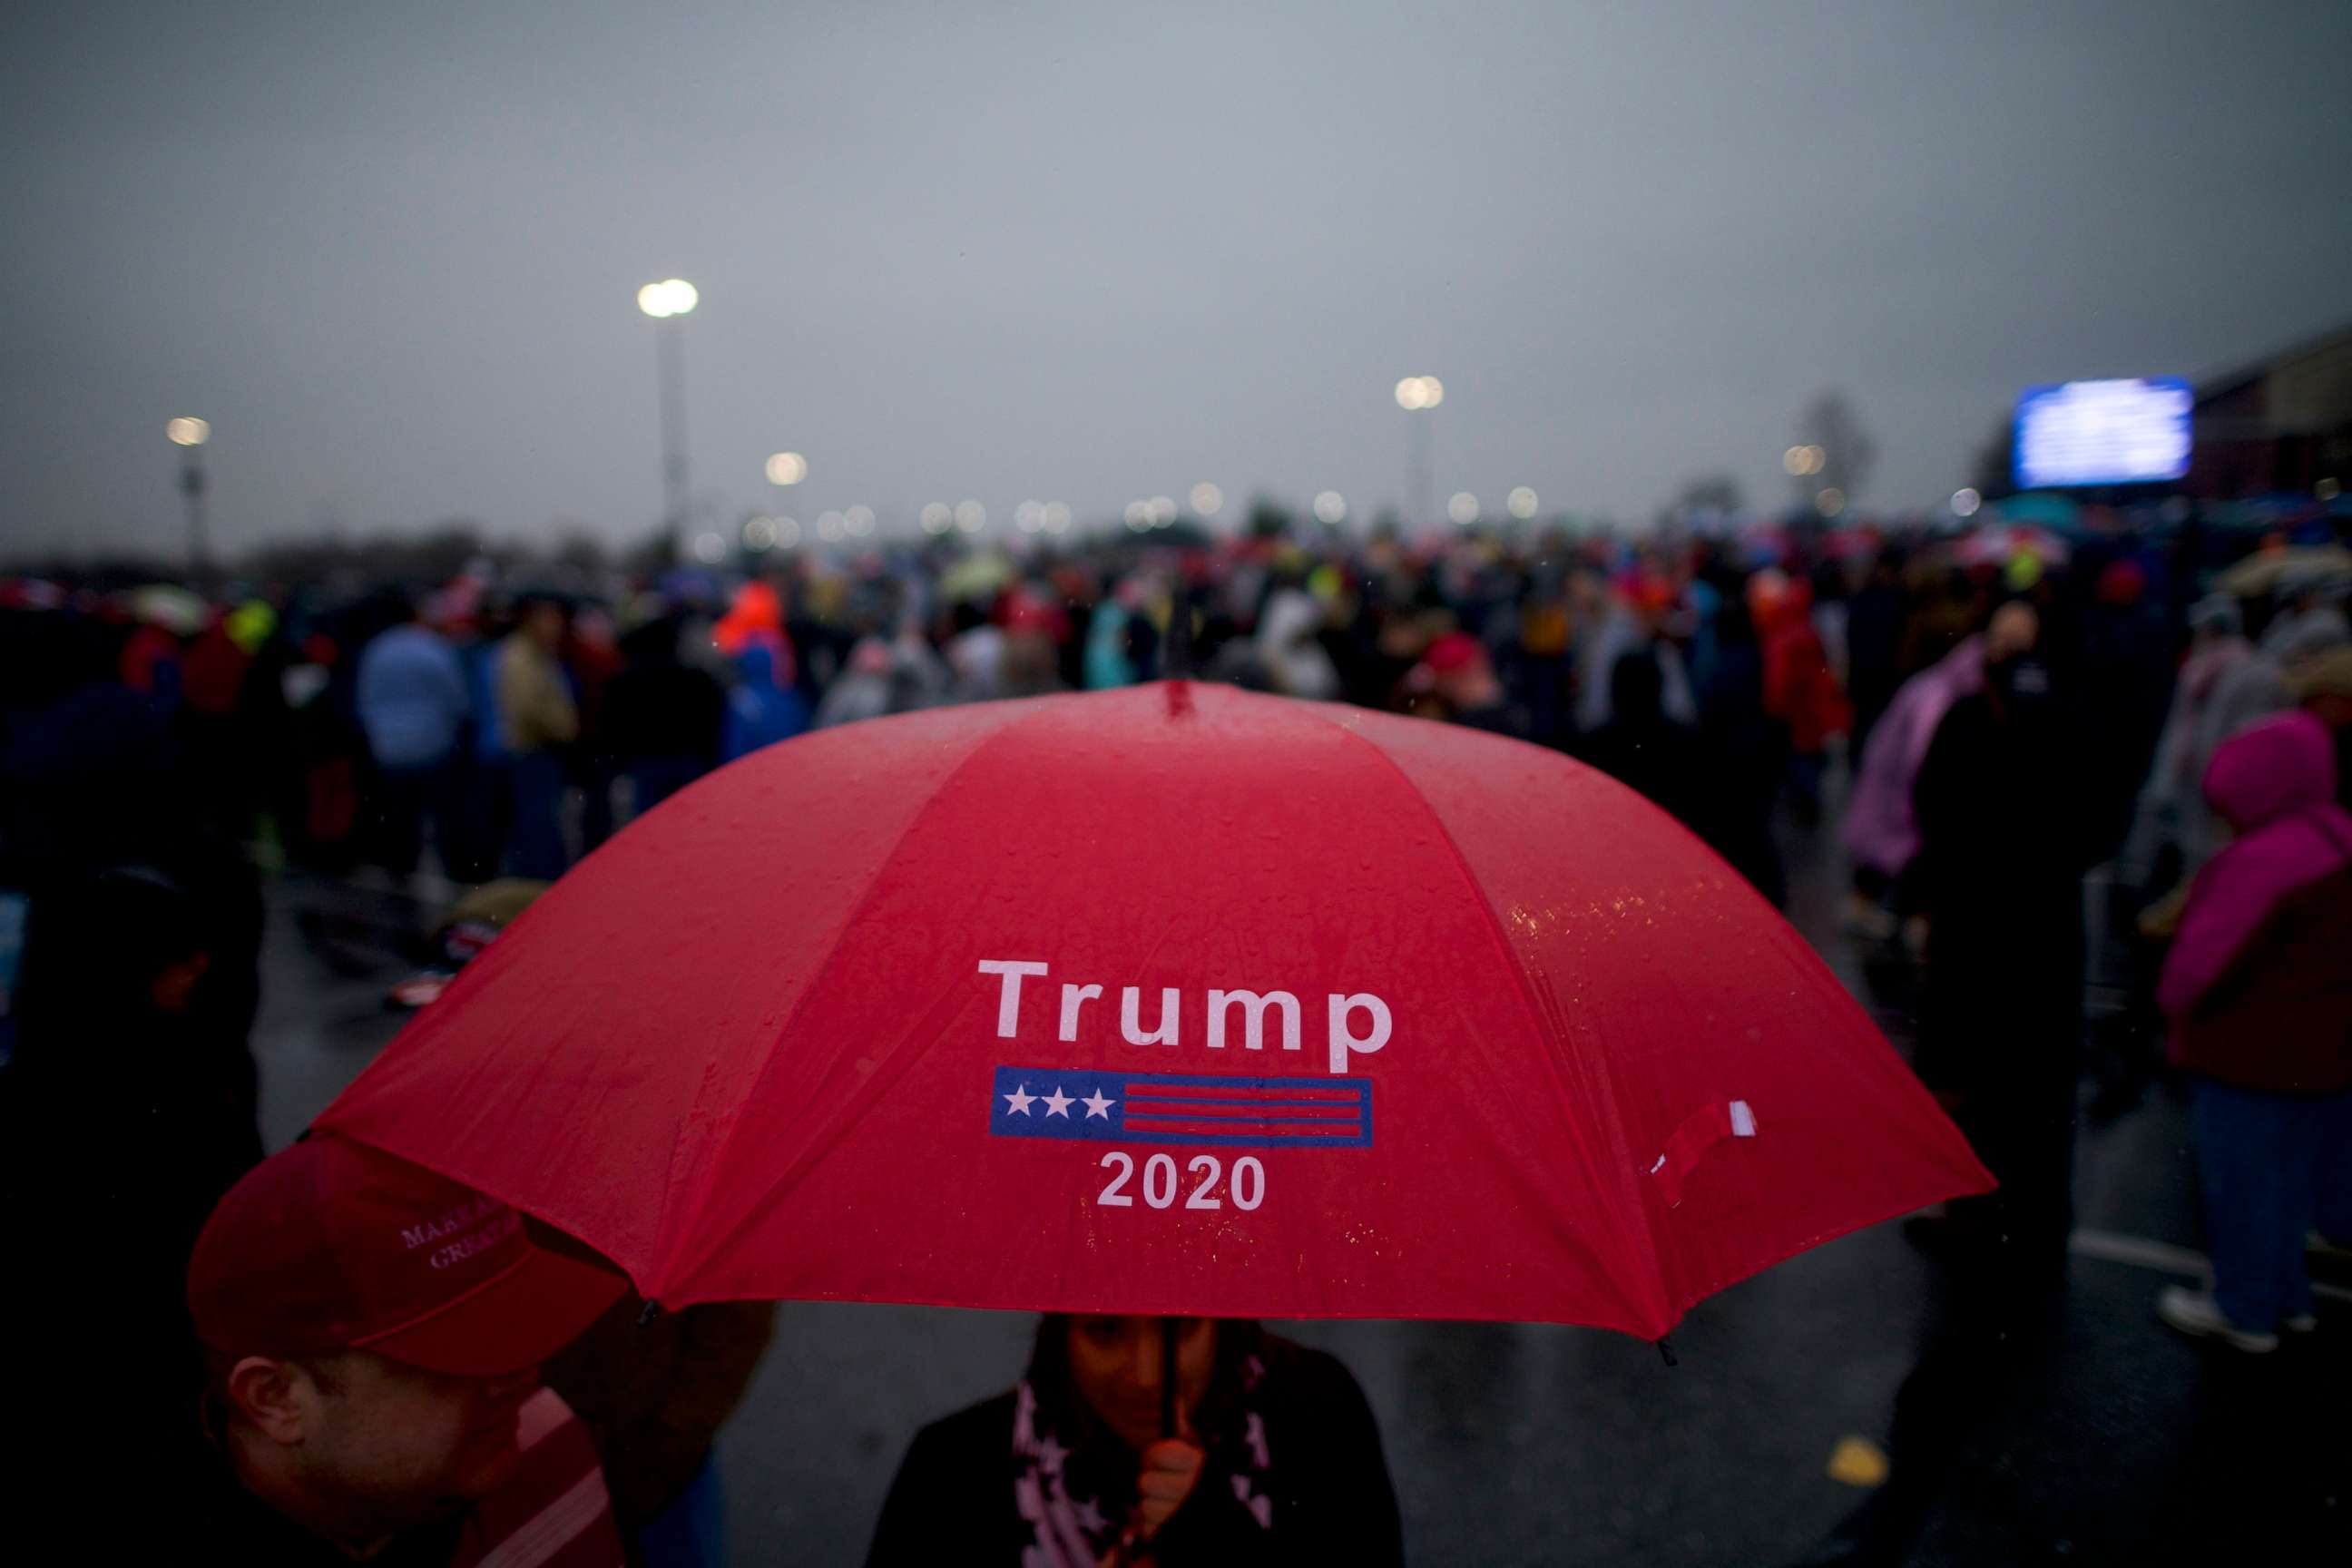 PHOTO: Supporters holding a "Trump 2020" umbrella wait in the rain before President Donald Trump holds a campaign rally, Dec. 10, 2019, in Hershey, Penn.